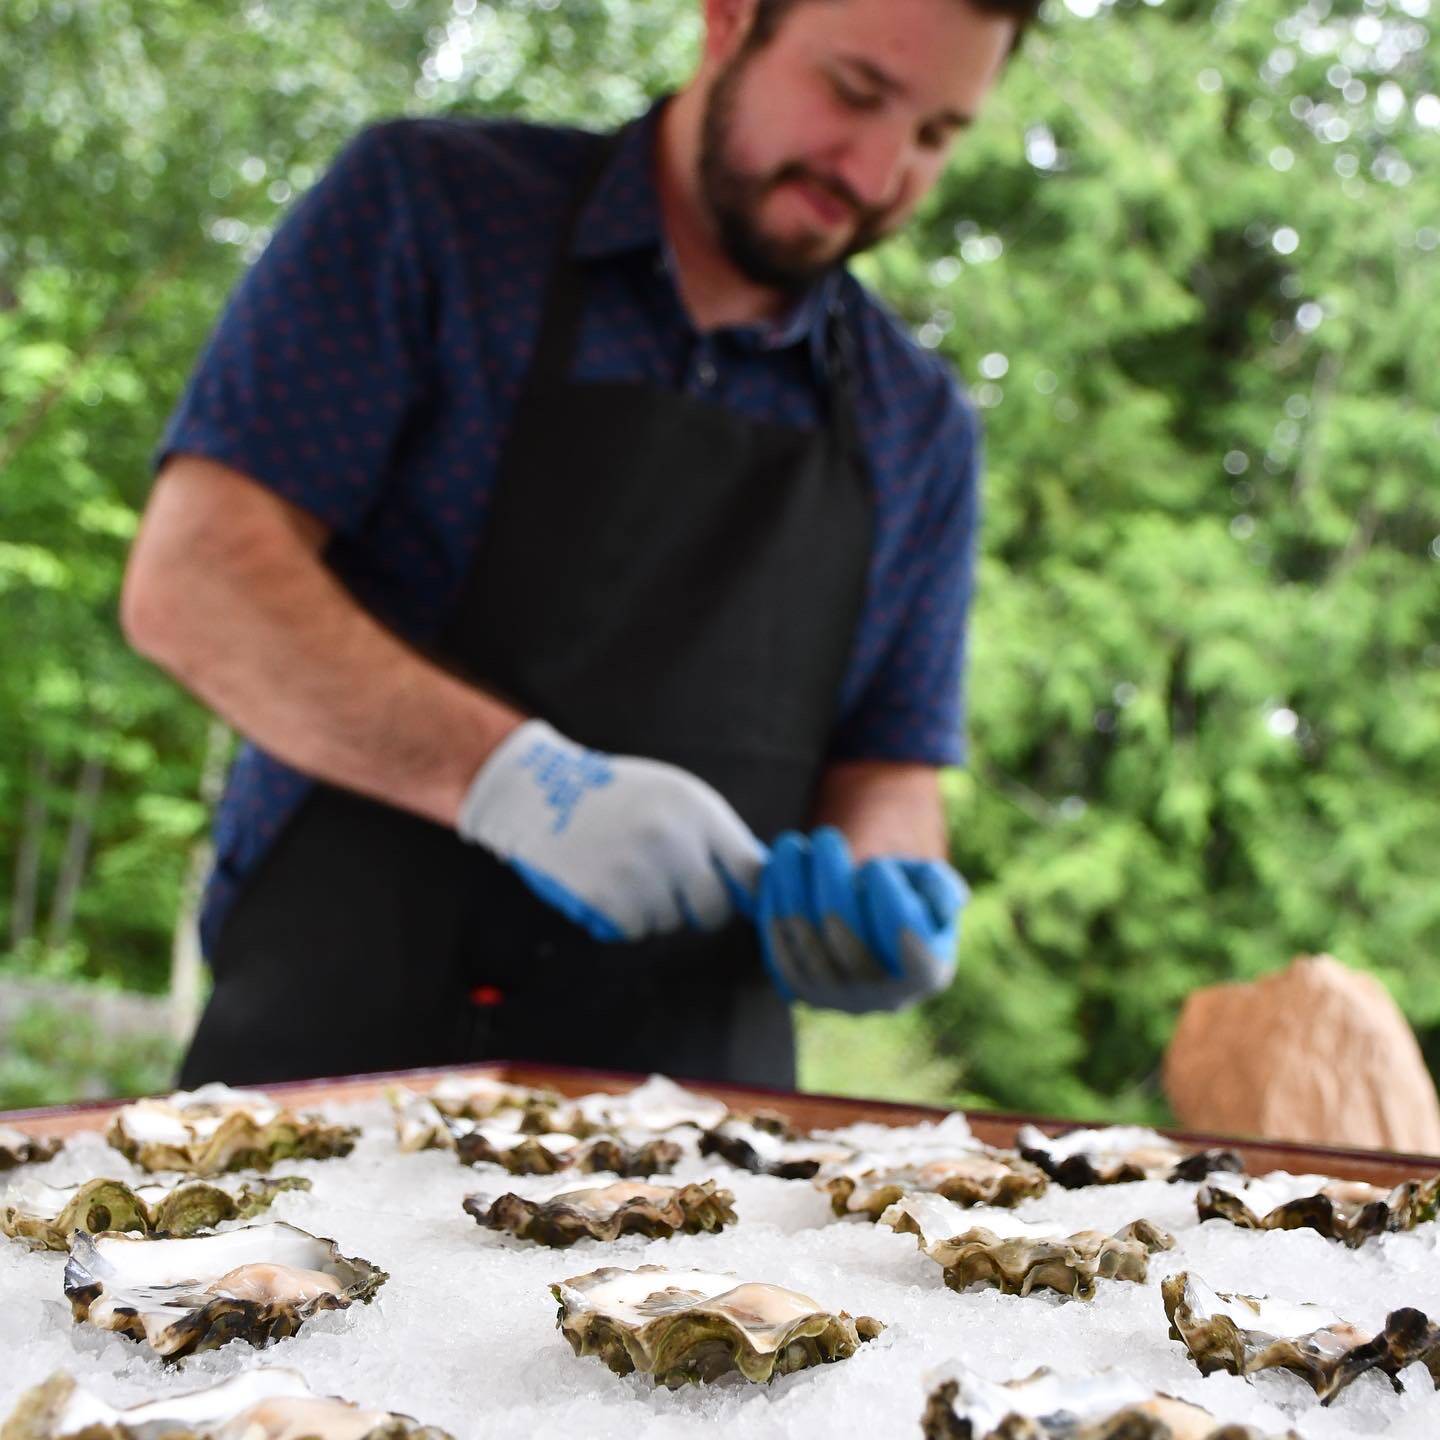 Courtesy photos
Above: Scott Schreck prepares the oysters. Below: These Olympic oysters are tiny compared with other types.